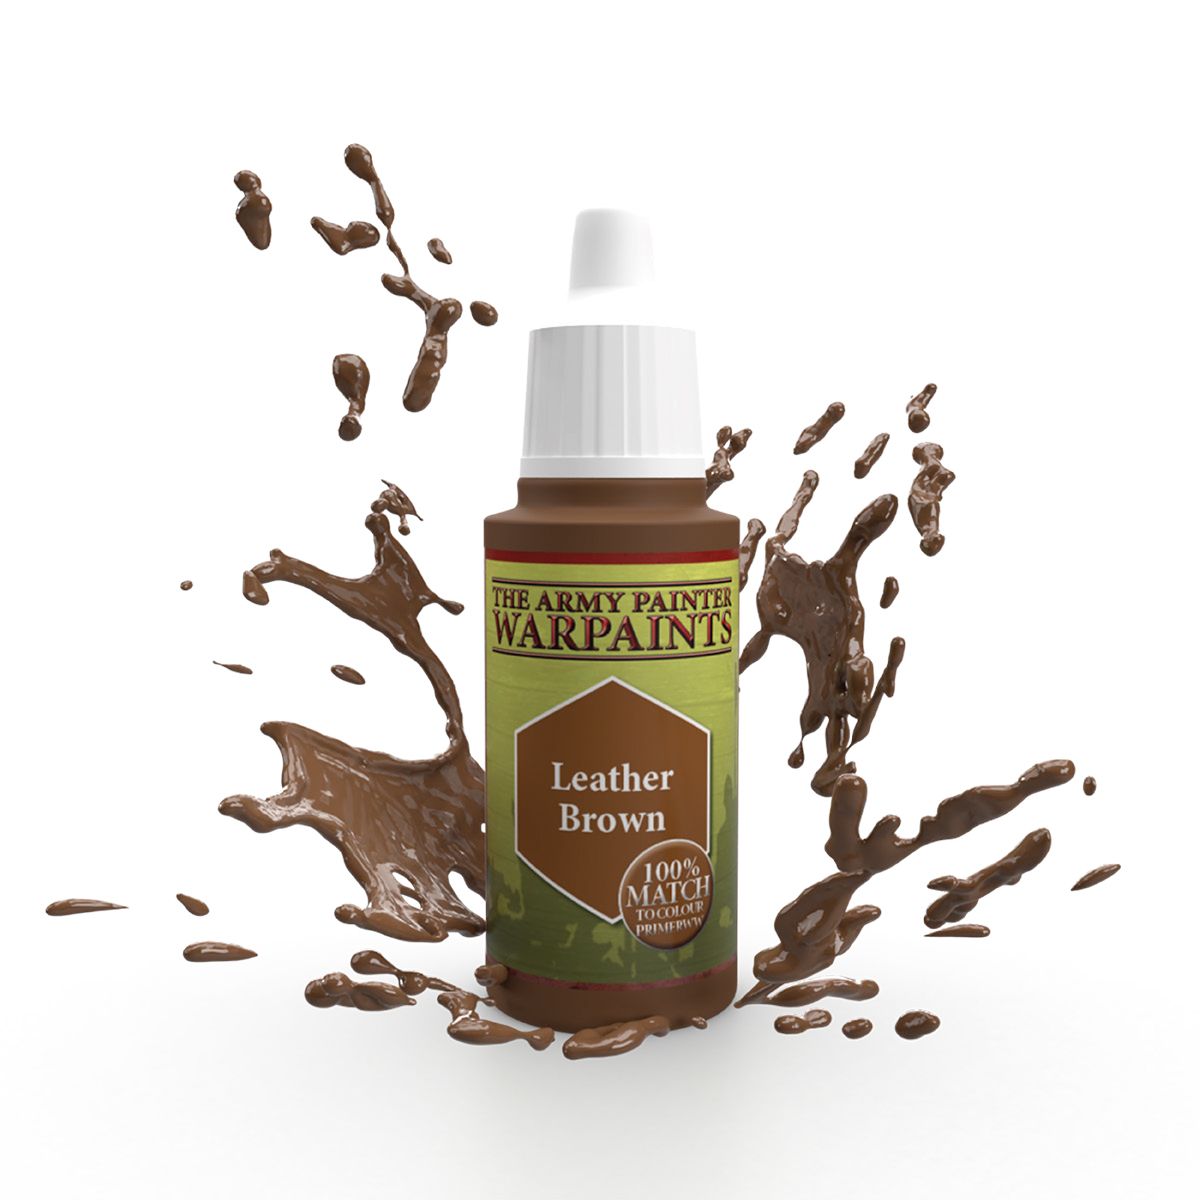 ARMY PAINTER WARPAINTS: LEATHER BROWN | Gopher Games